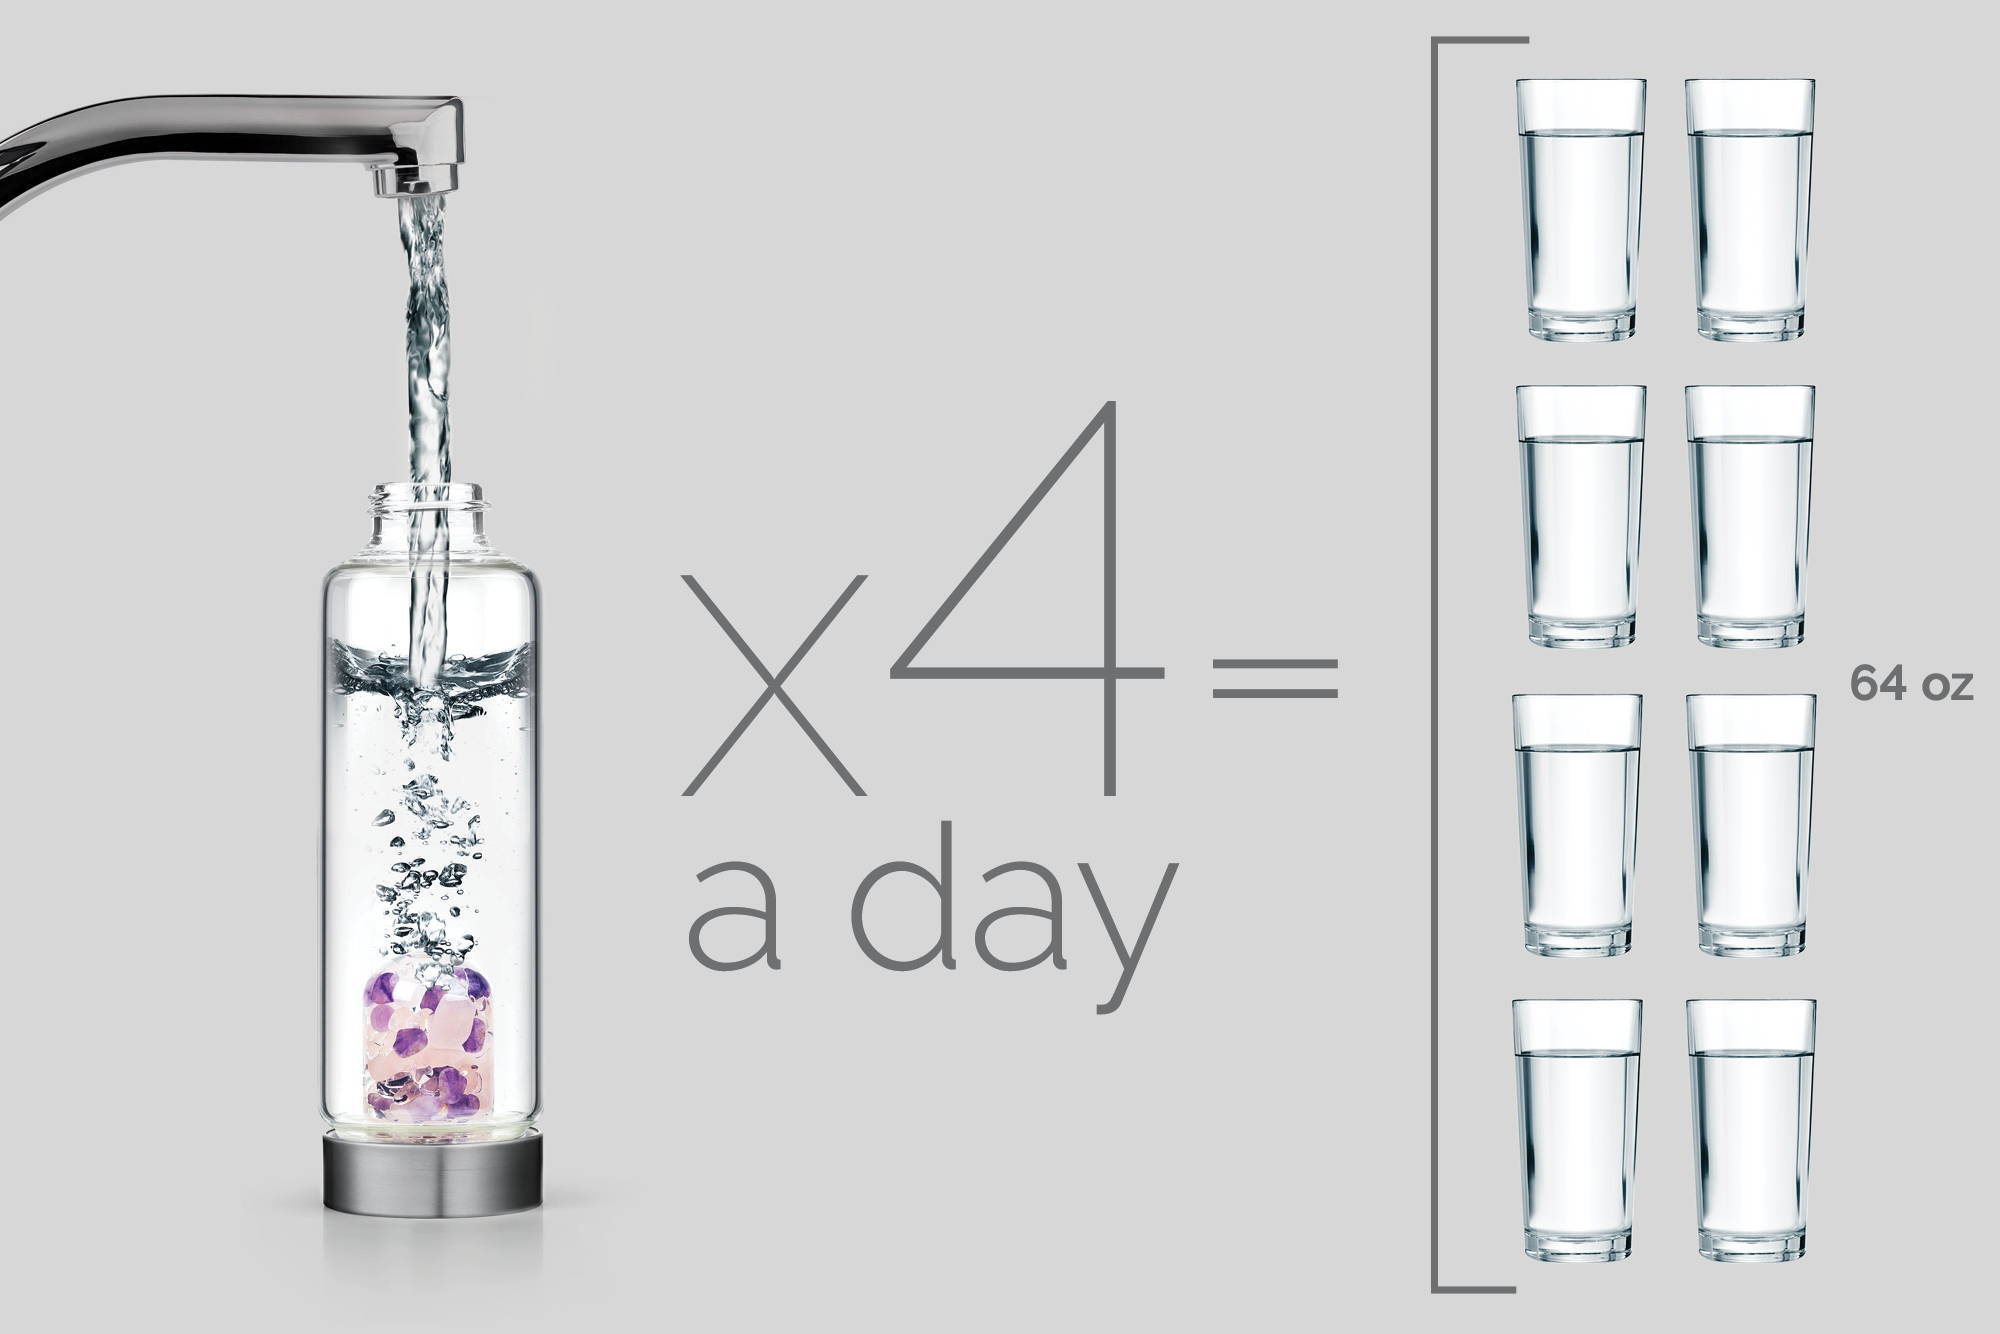 4 ViA bottles gets you 64 oz of daily water intake